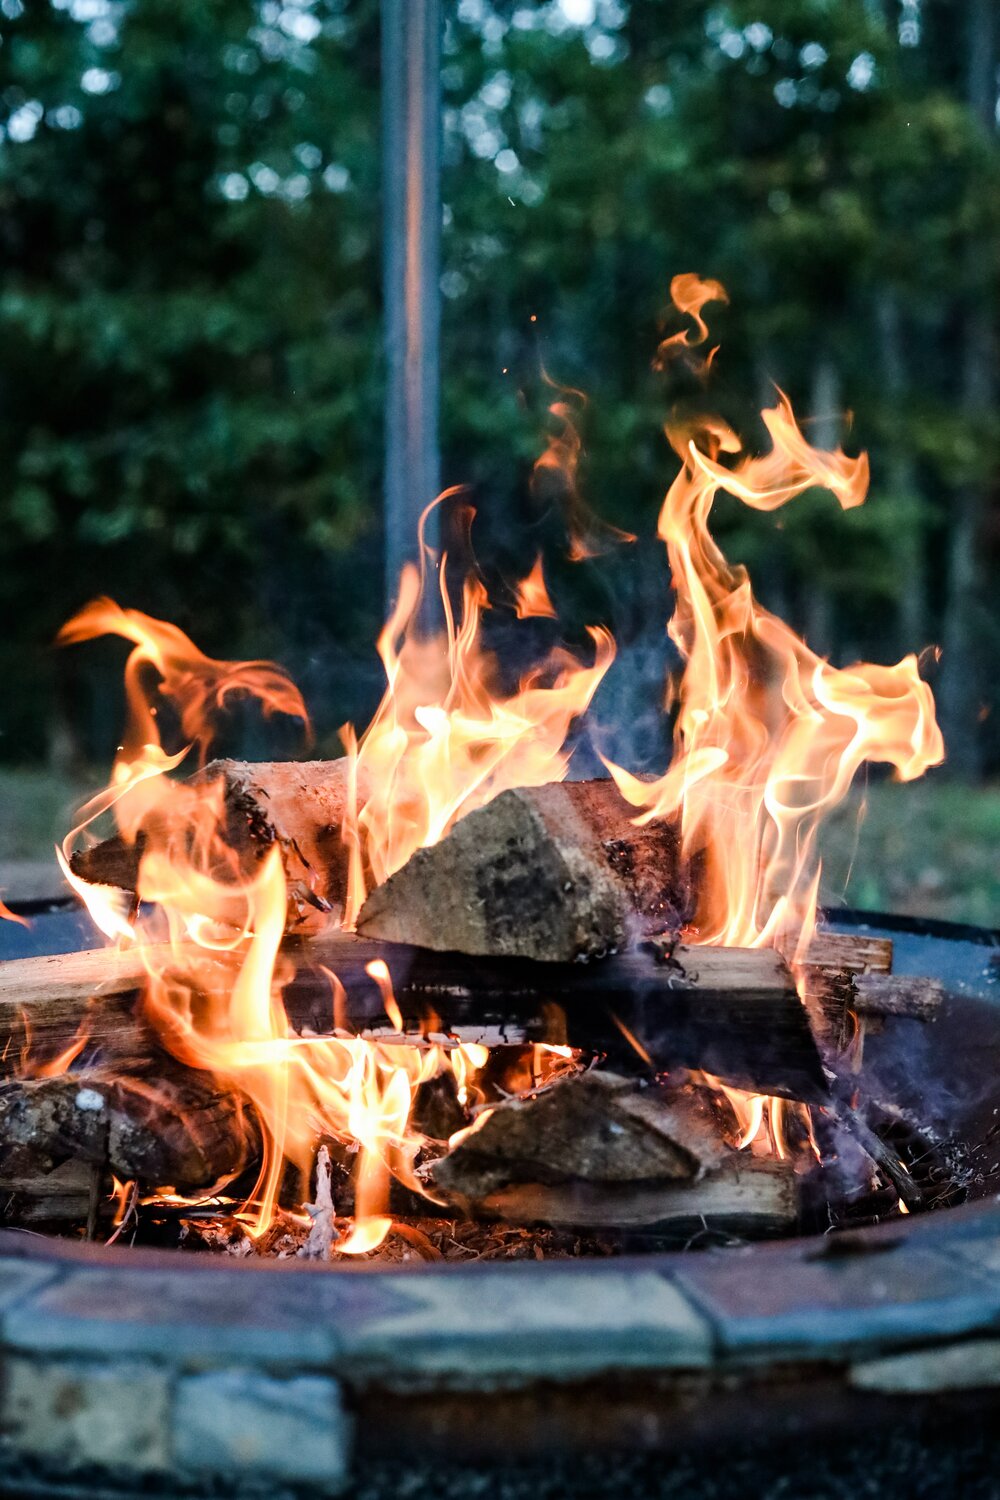 Fire pits are a great and easy way to relax with friends for the evening.